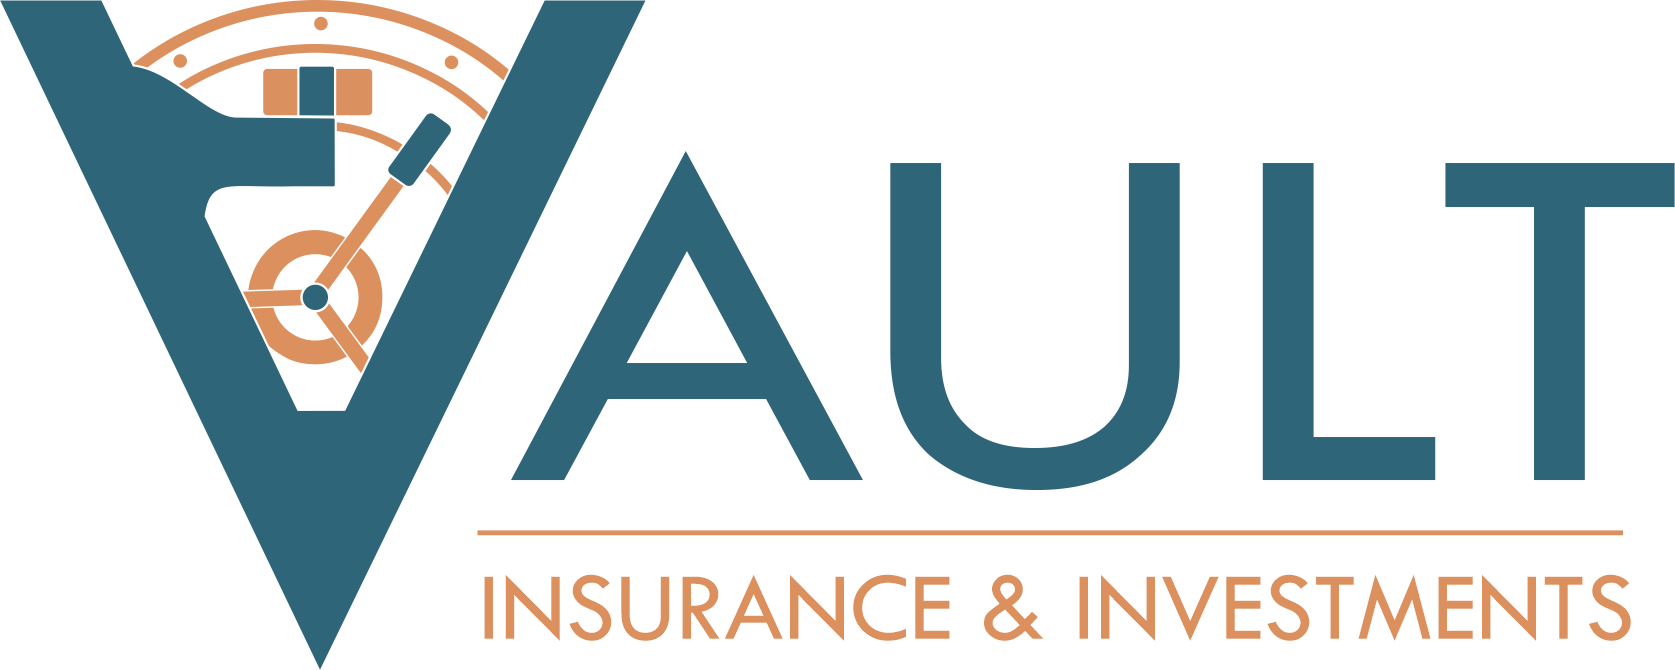 Vault Insurance & Investments